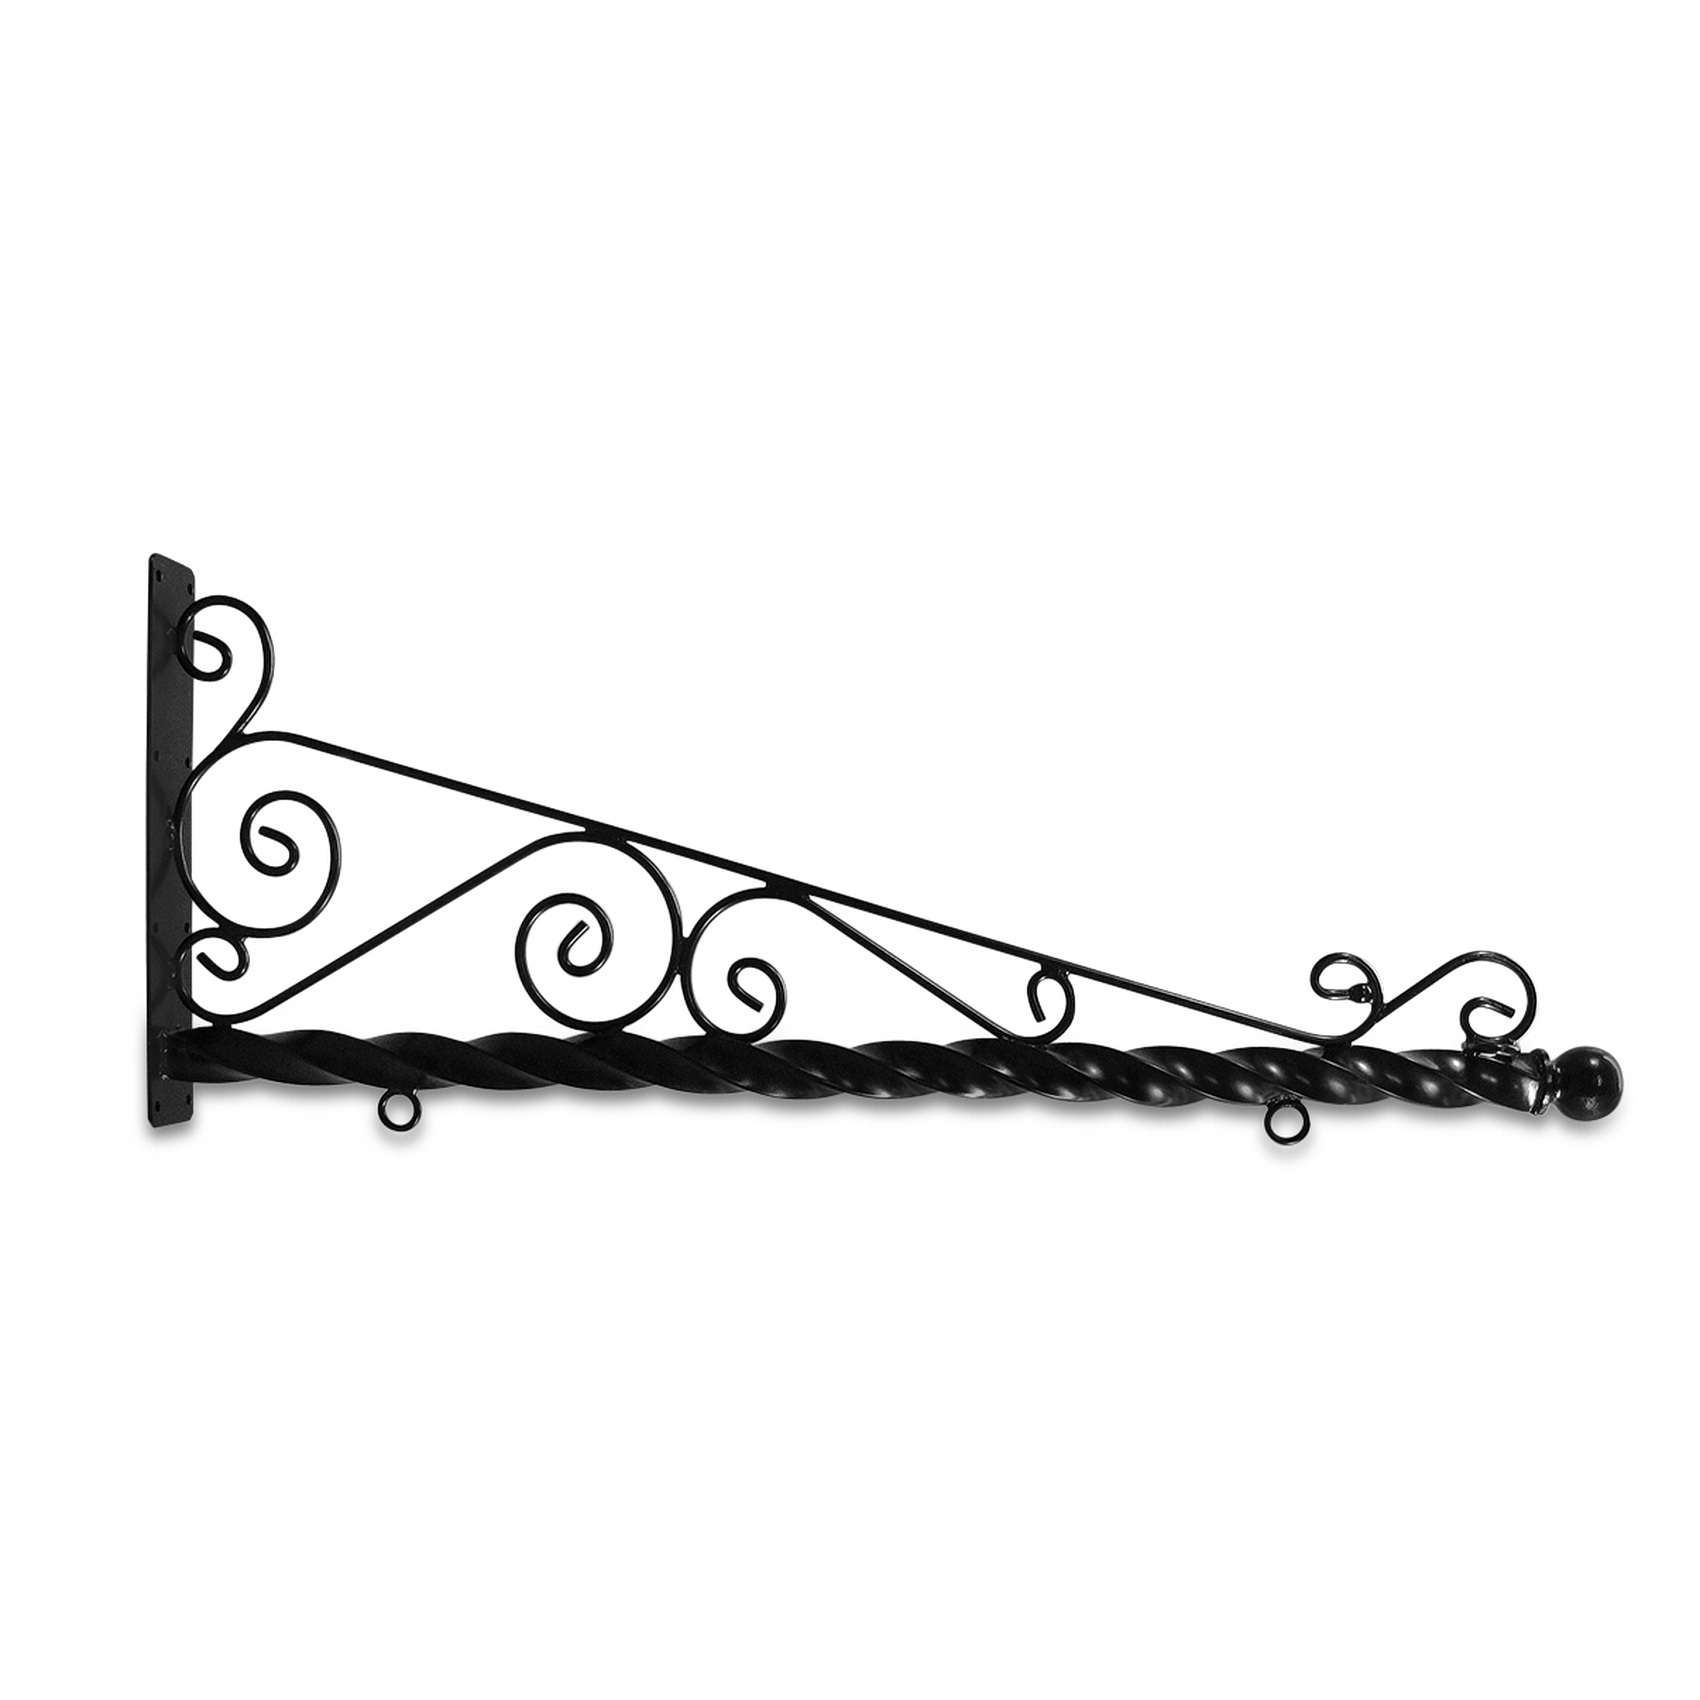 60'' Black Horizontal Super Deluxe Quin Spiral Aluminum Bracket with Ball Finial